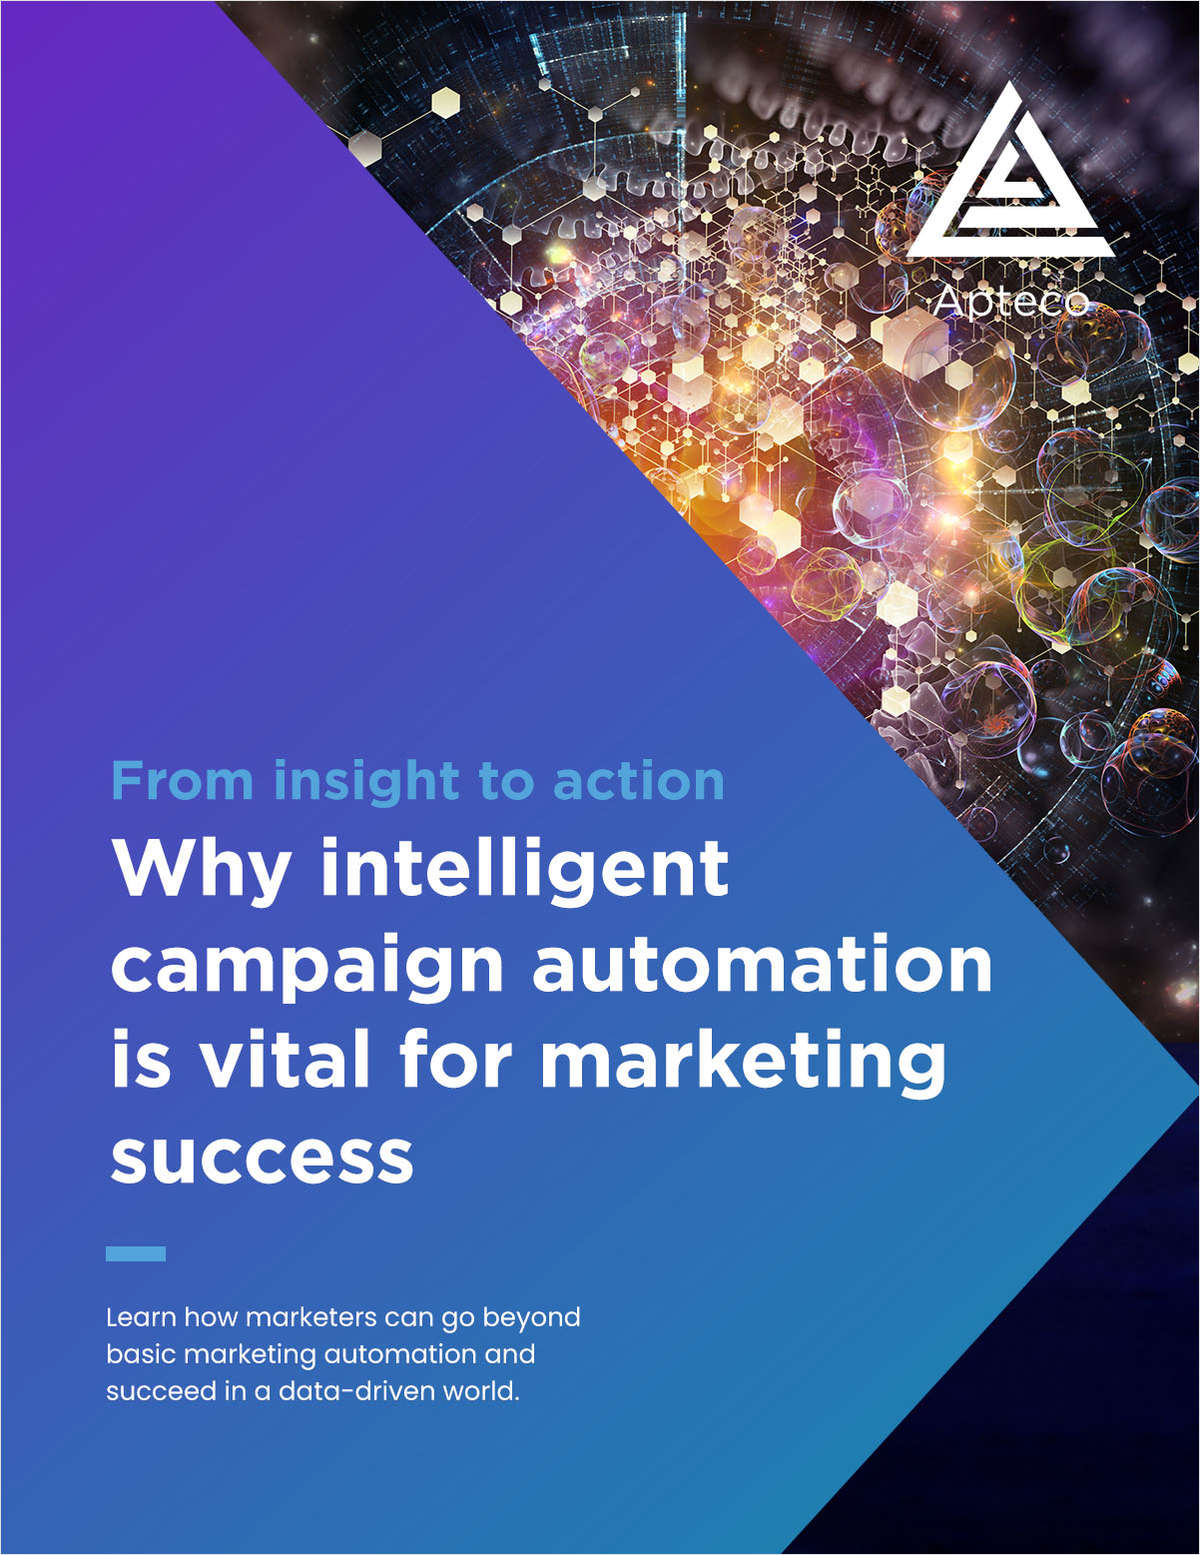 From insight to action - Why intelligent campaign automation is vital for marketing success